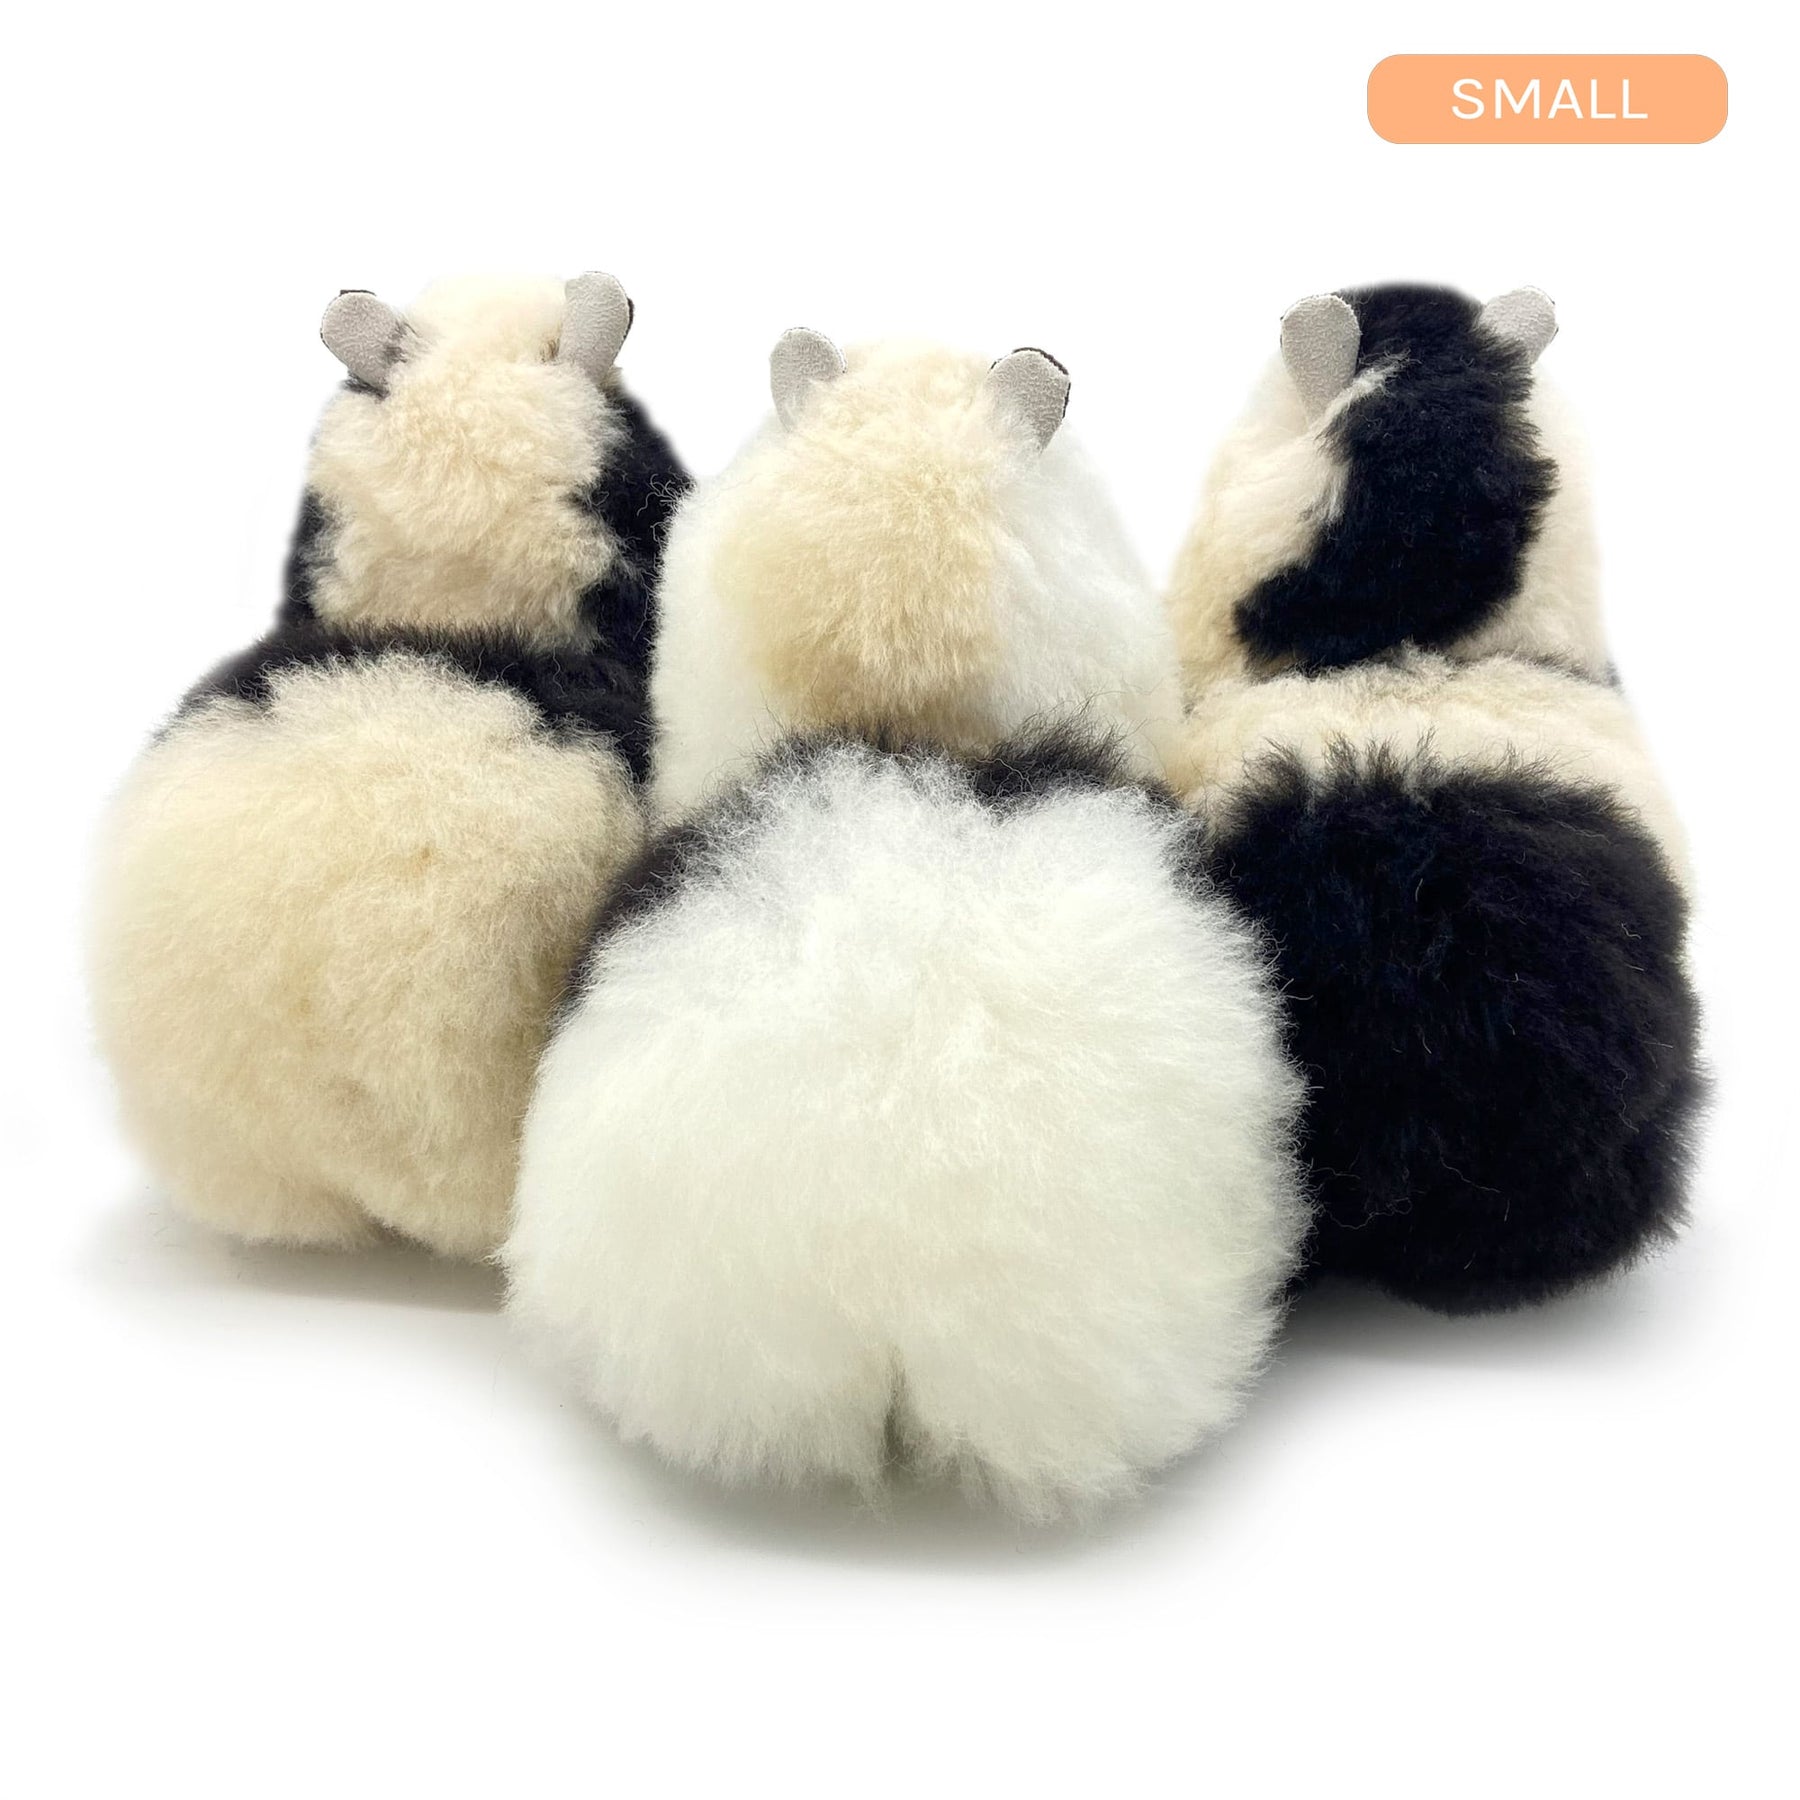 Honey Badger - Small Alpaca Toy (23cm) - Limited Edition